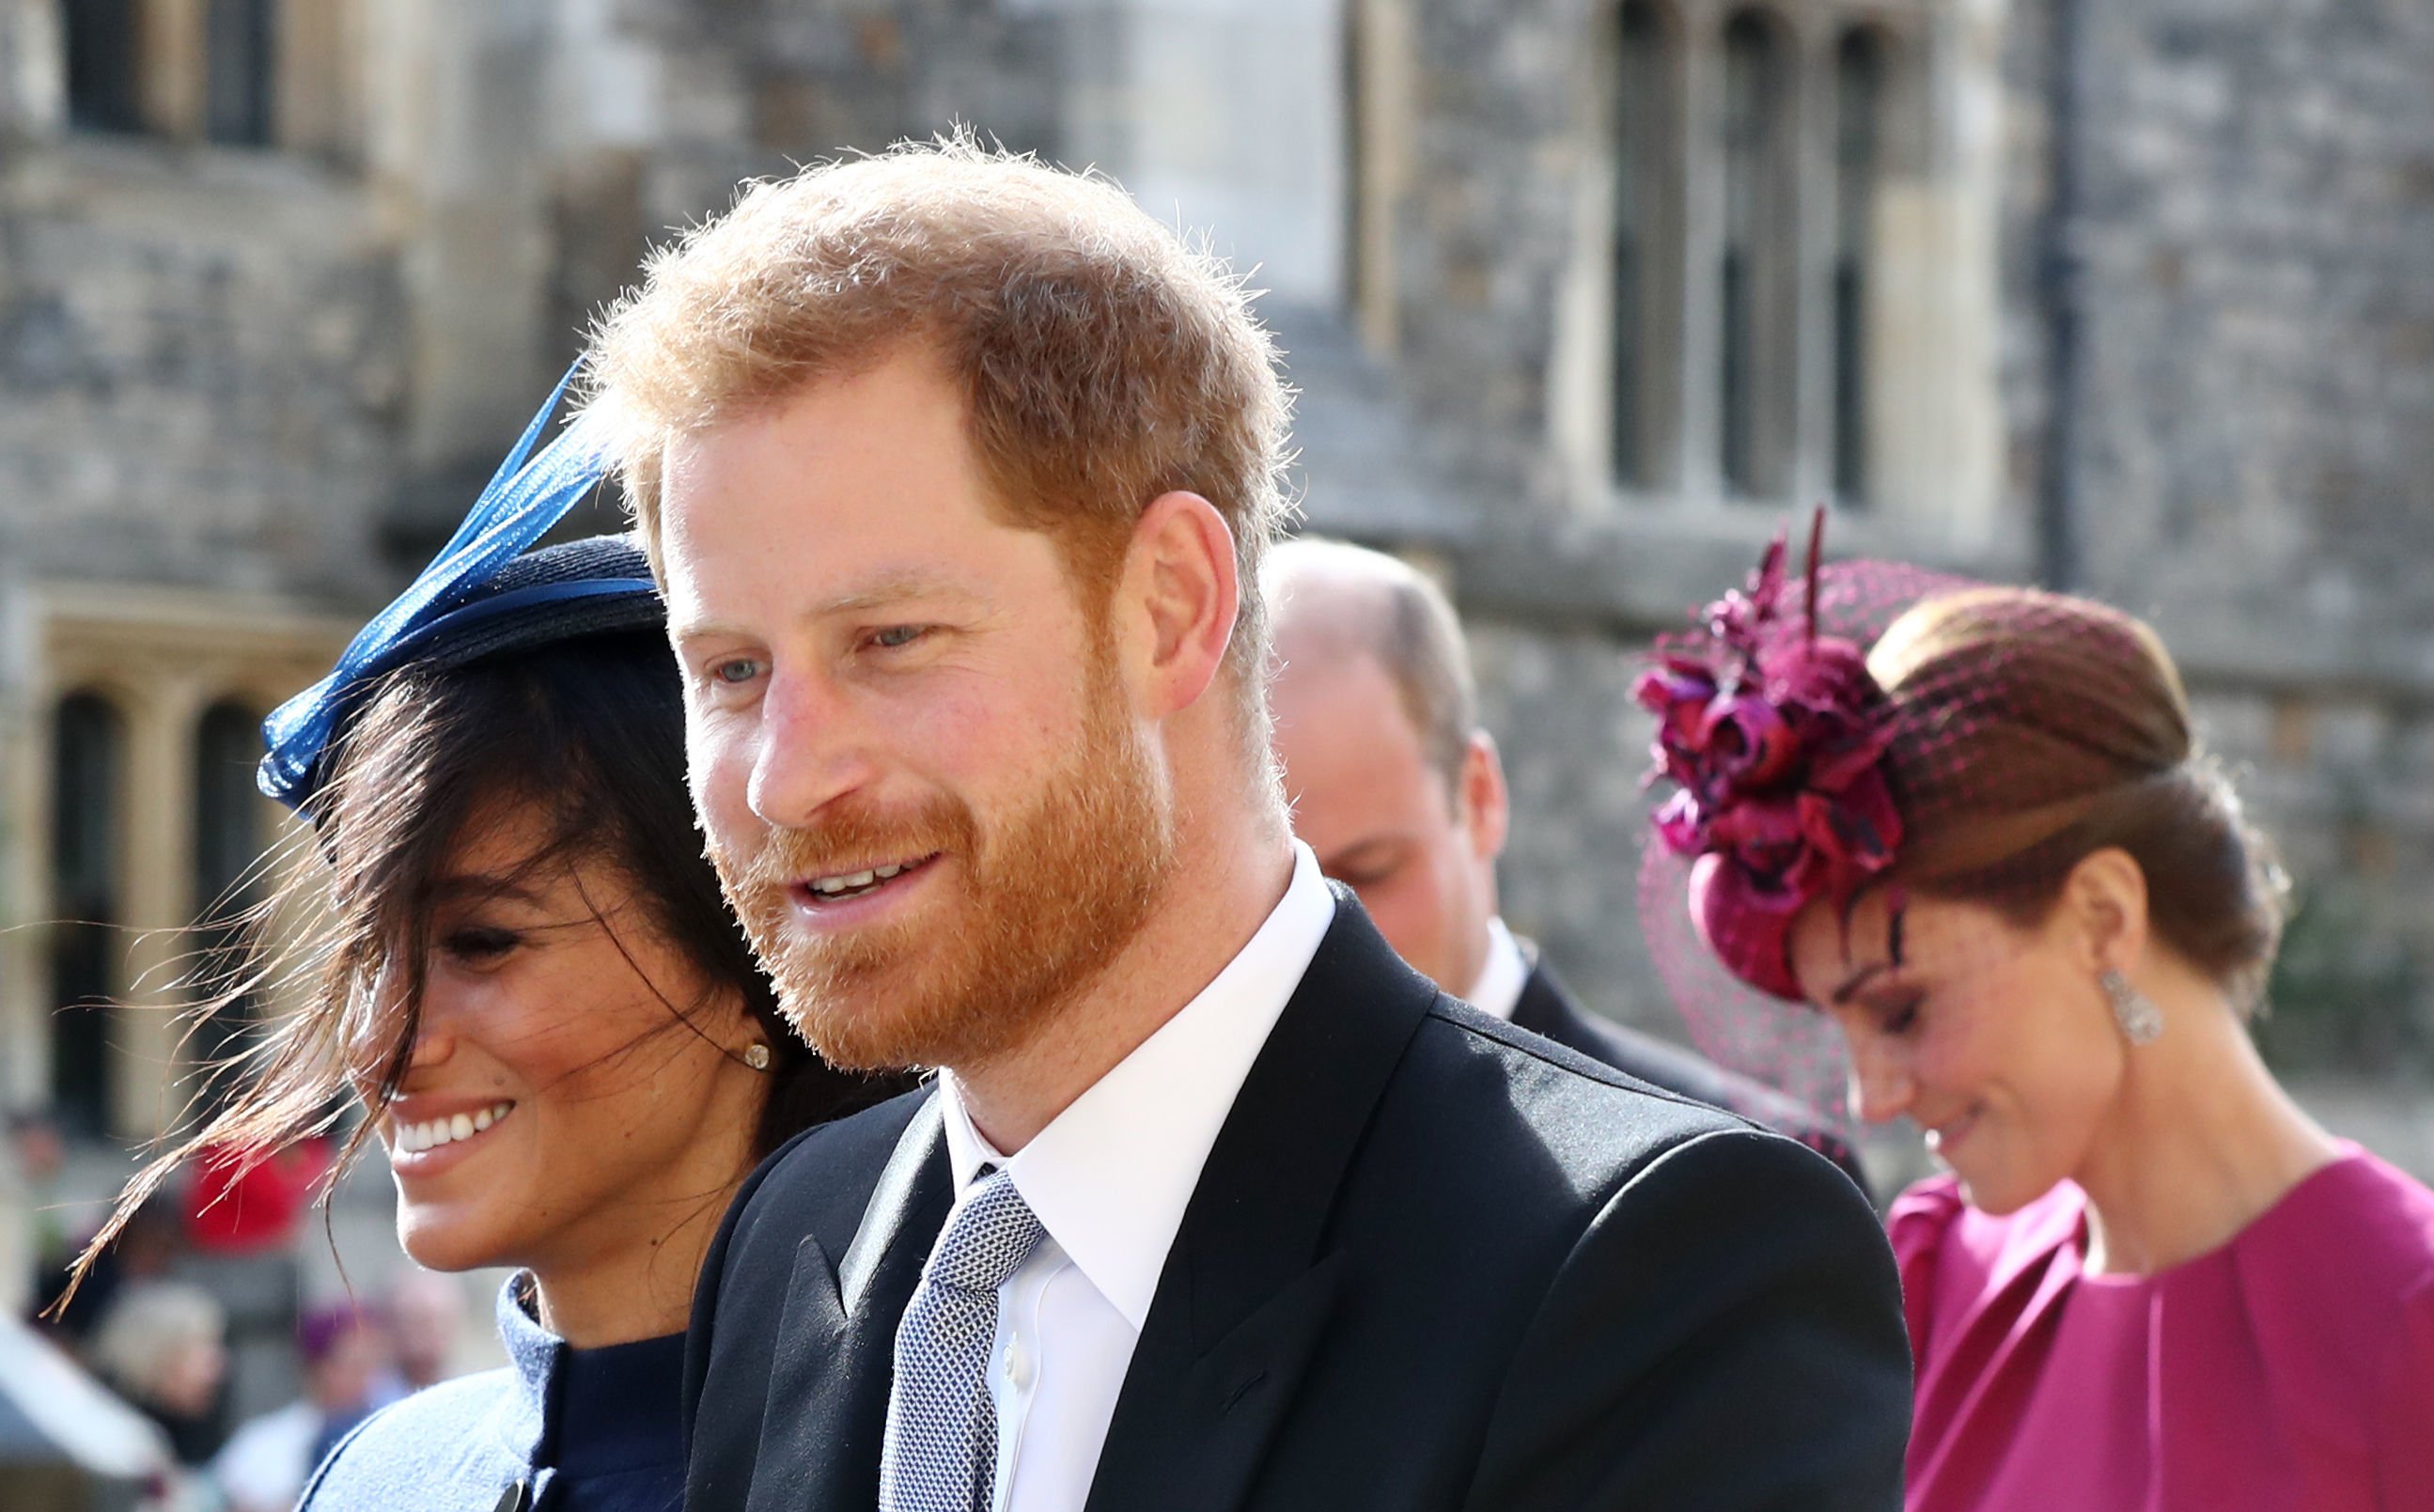 Prince Harry and Meghan Markle pictured leaving with Kate Middleton and Prince William after attending the wedding of Princess Eugenie of York and Jack Brooksbank at St George's Chapel Windsor Castle on October 12, 2018 in Windsor. / Source: Getty Images